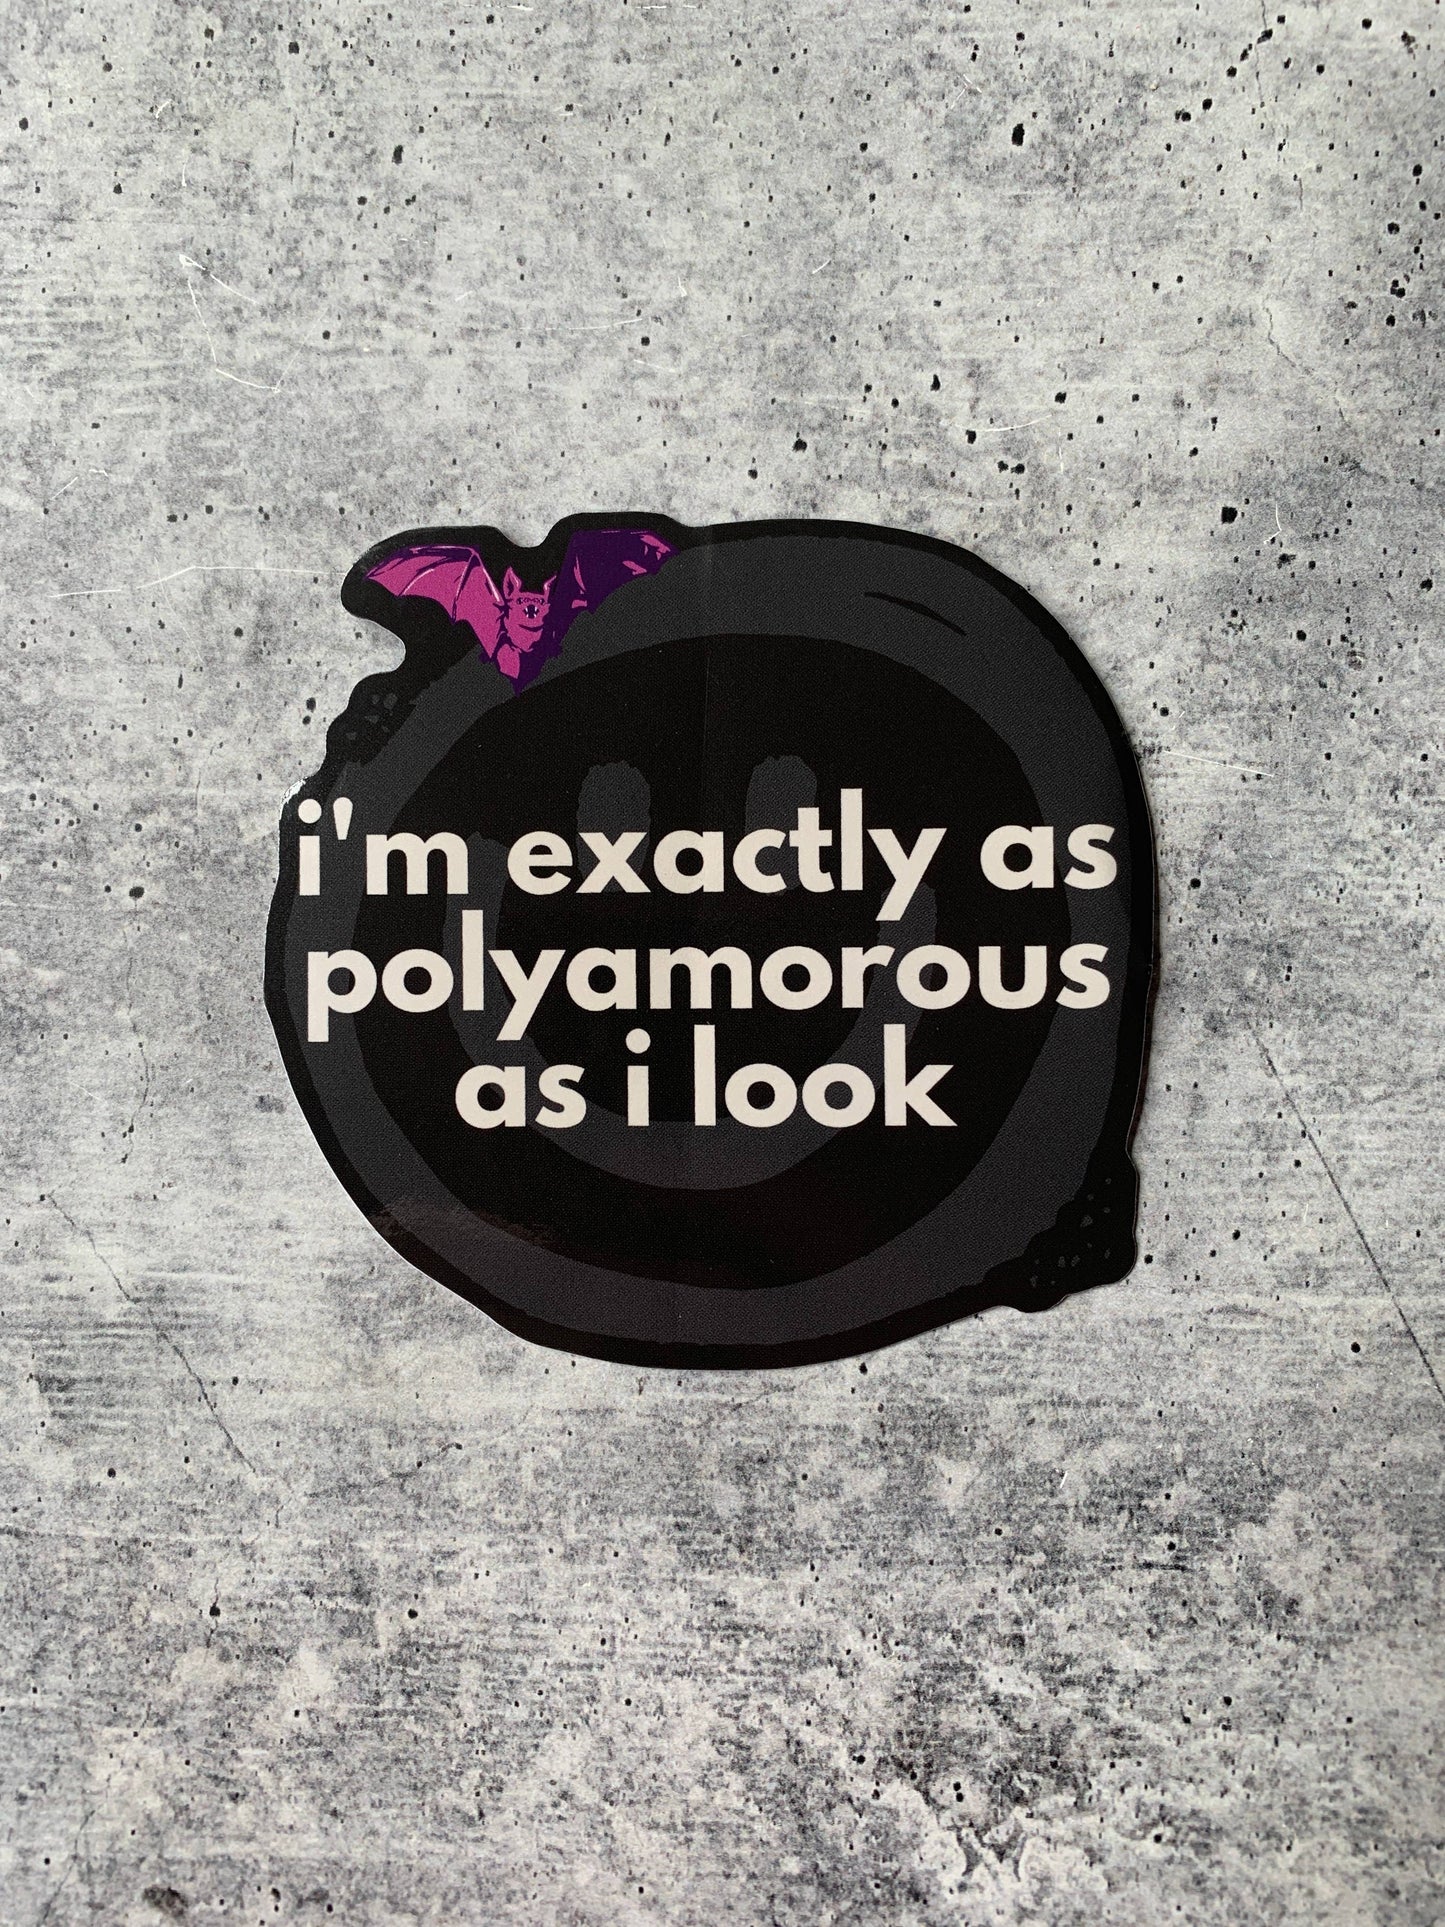 I'm Exactly as Polyamorous as I Look Die Cut Vinyl Sticker: Loose (save 50¢!)